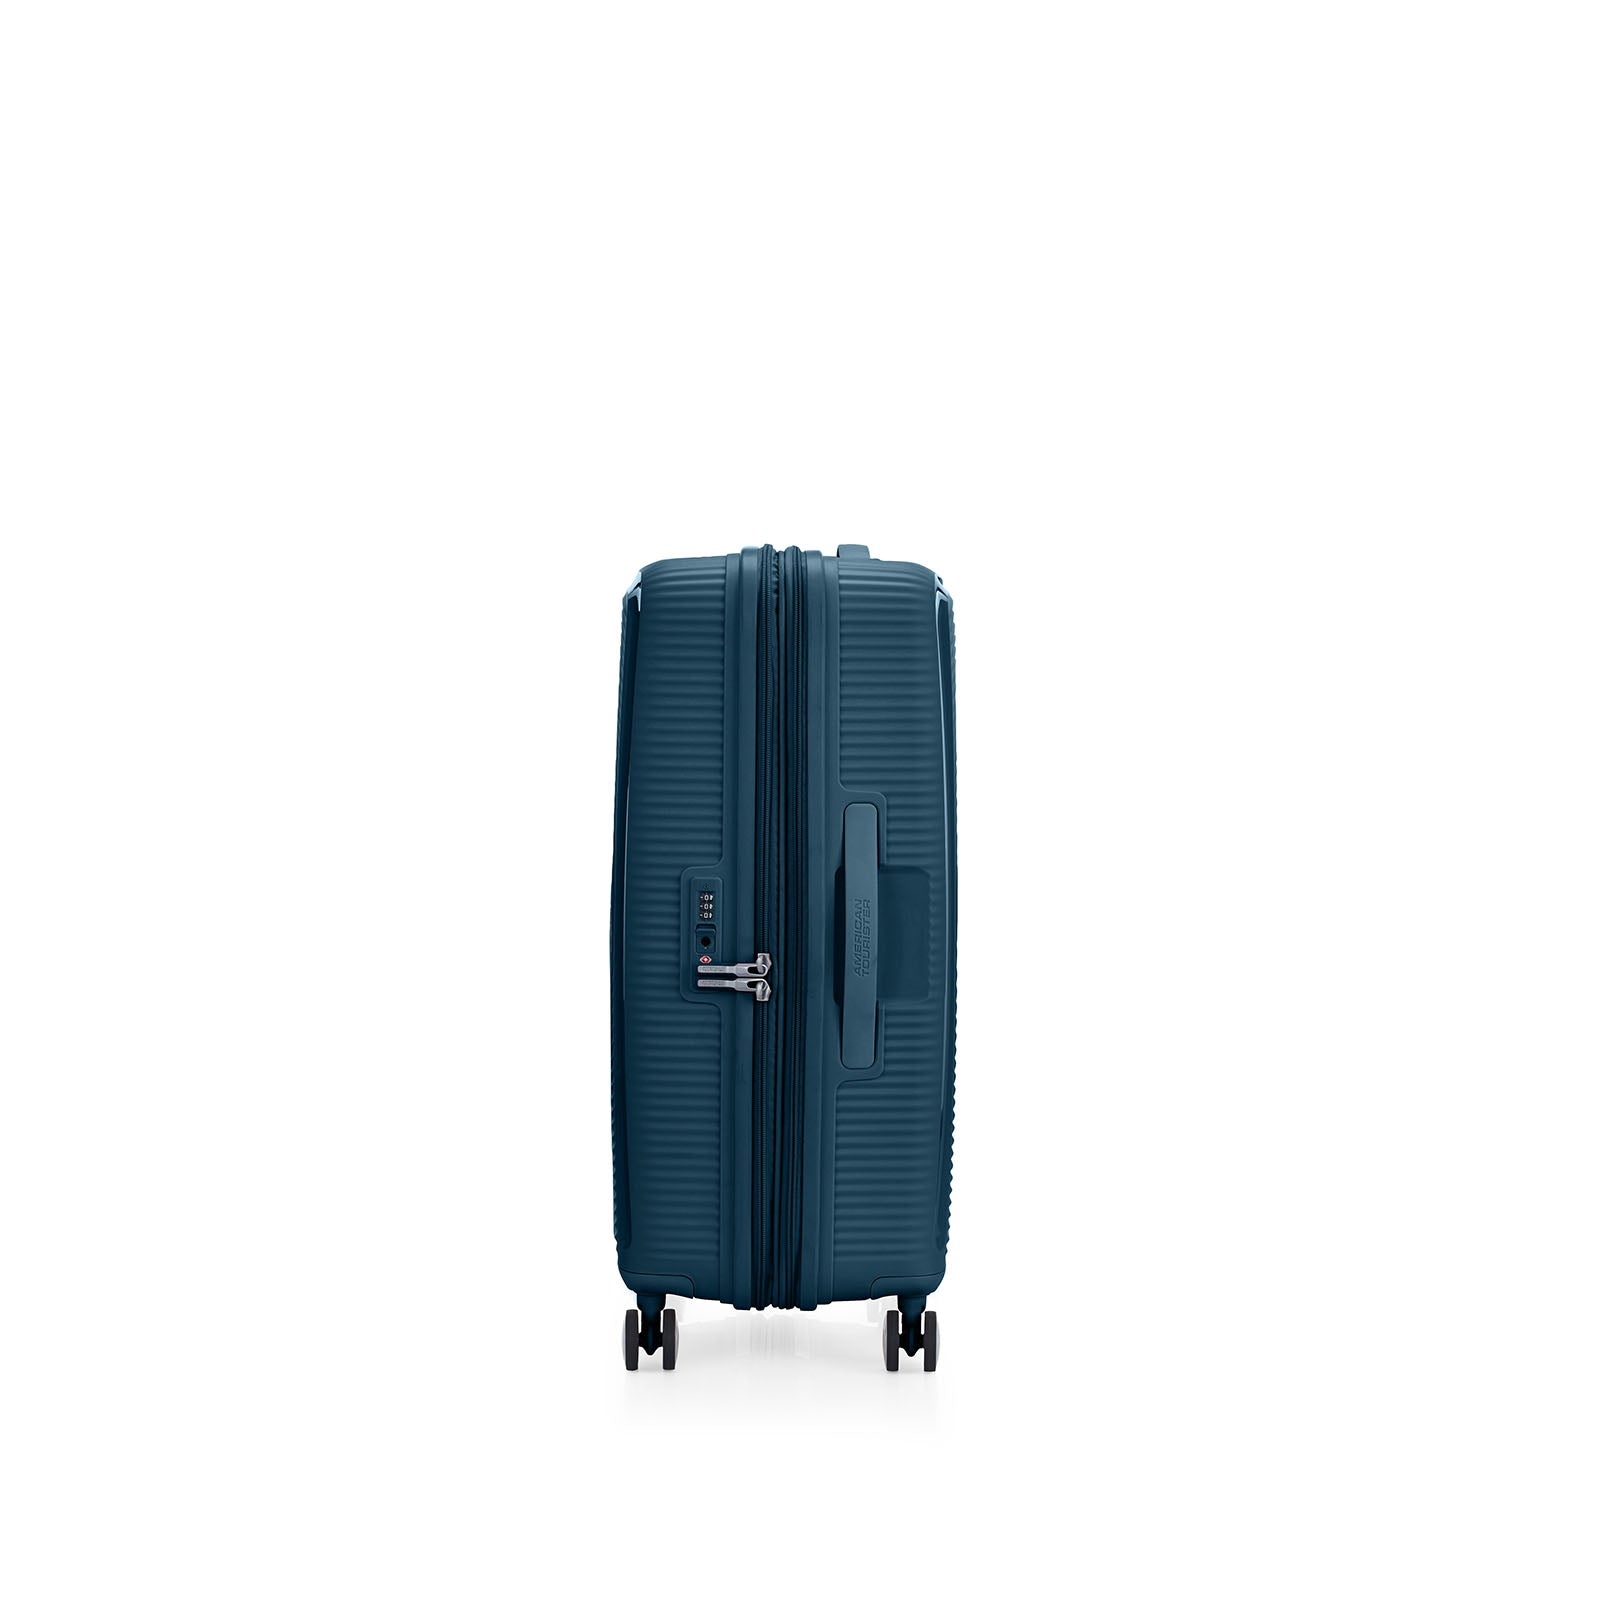 American-Tourister-Curio-2-69cm-Suitcase-Varisty-Green-Side-Angle